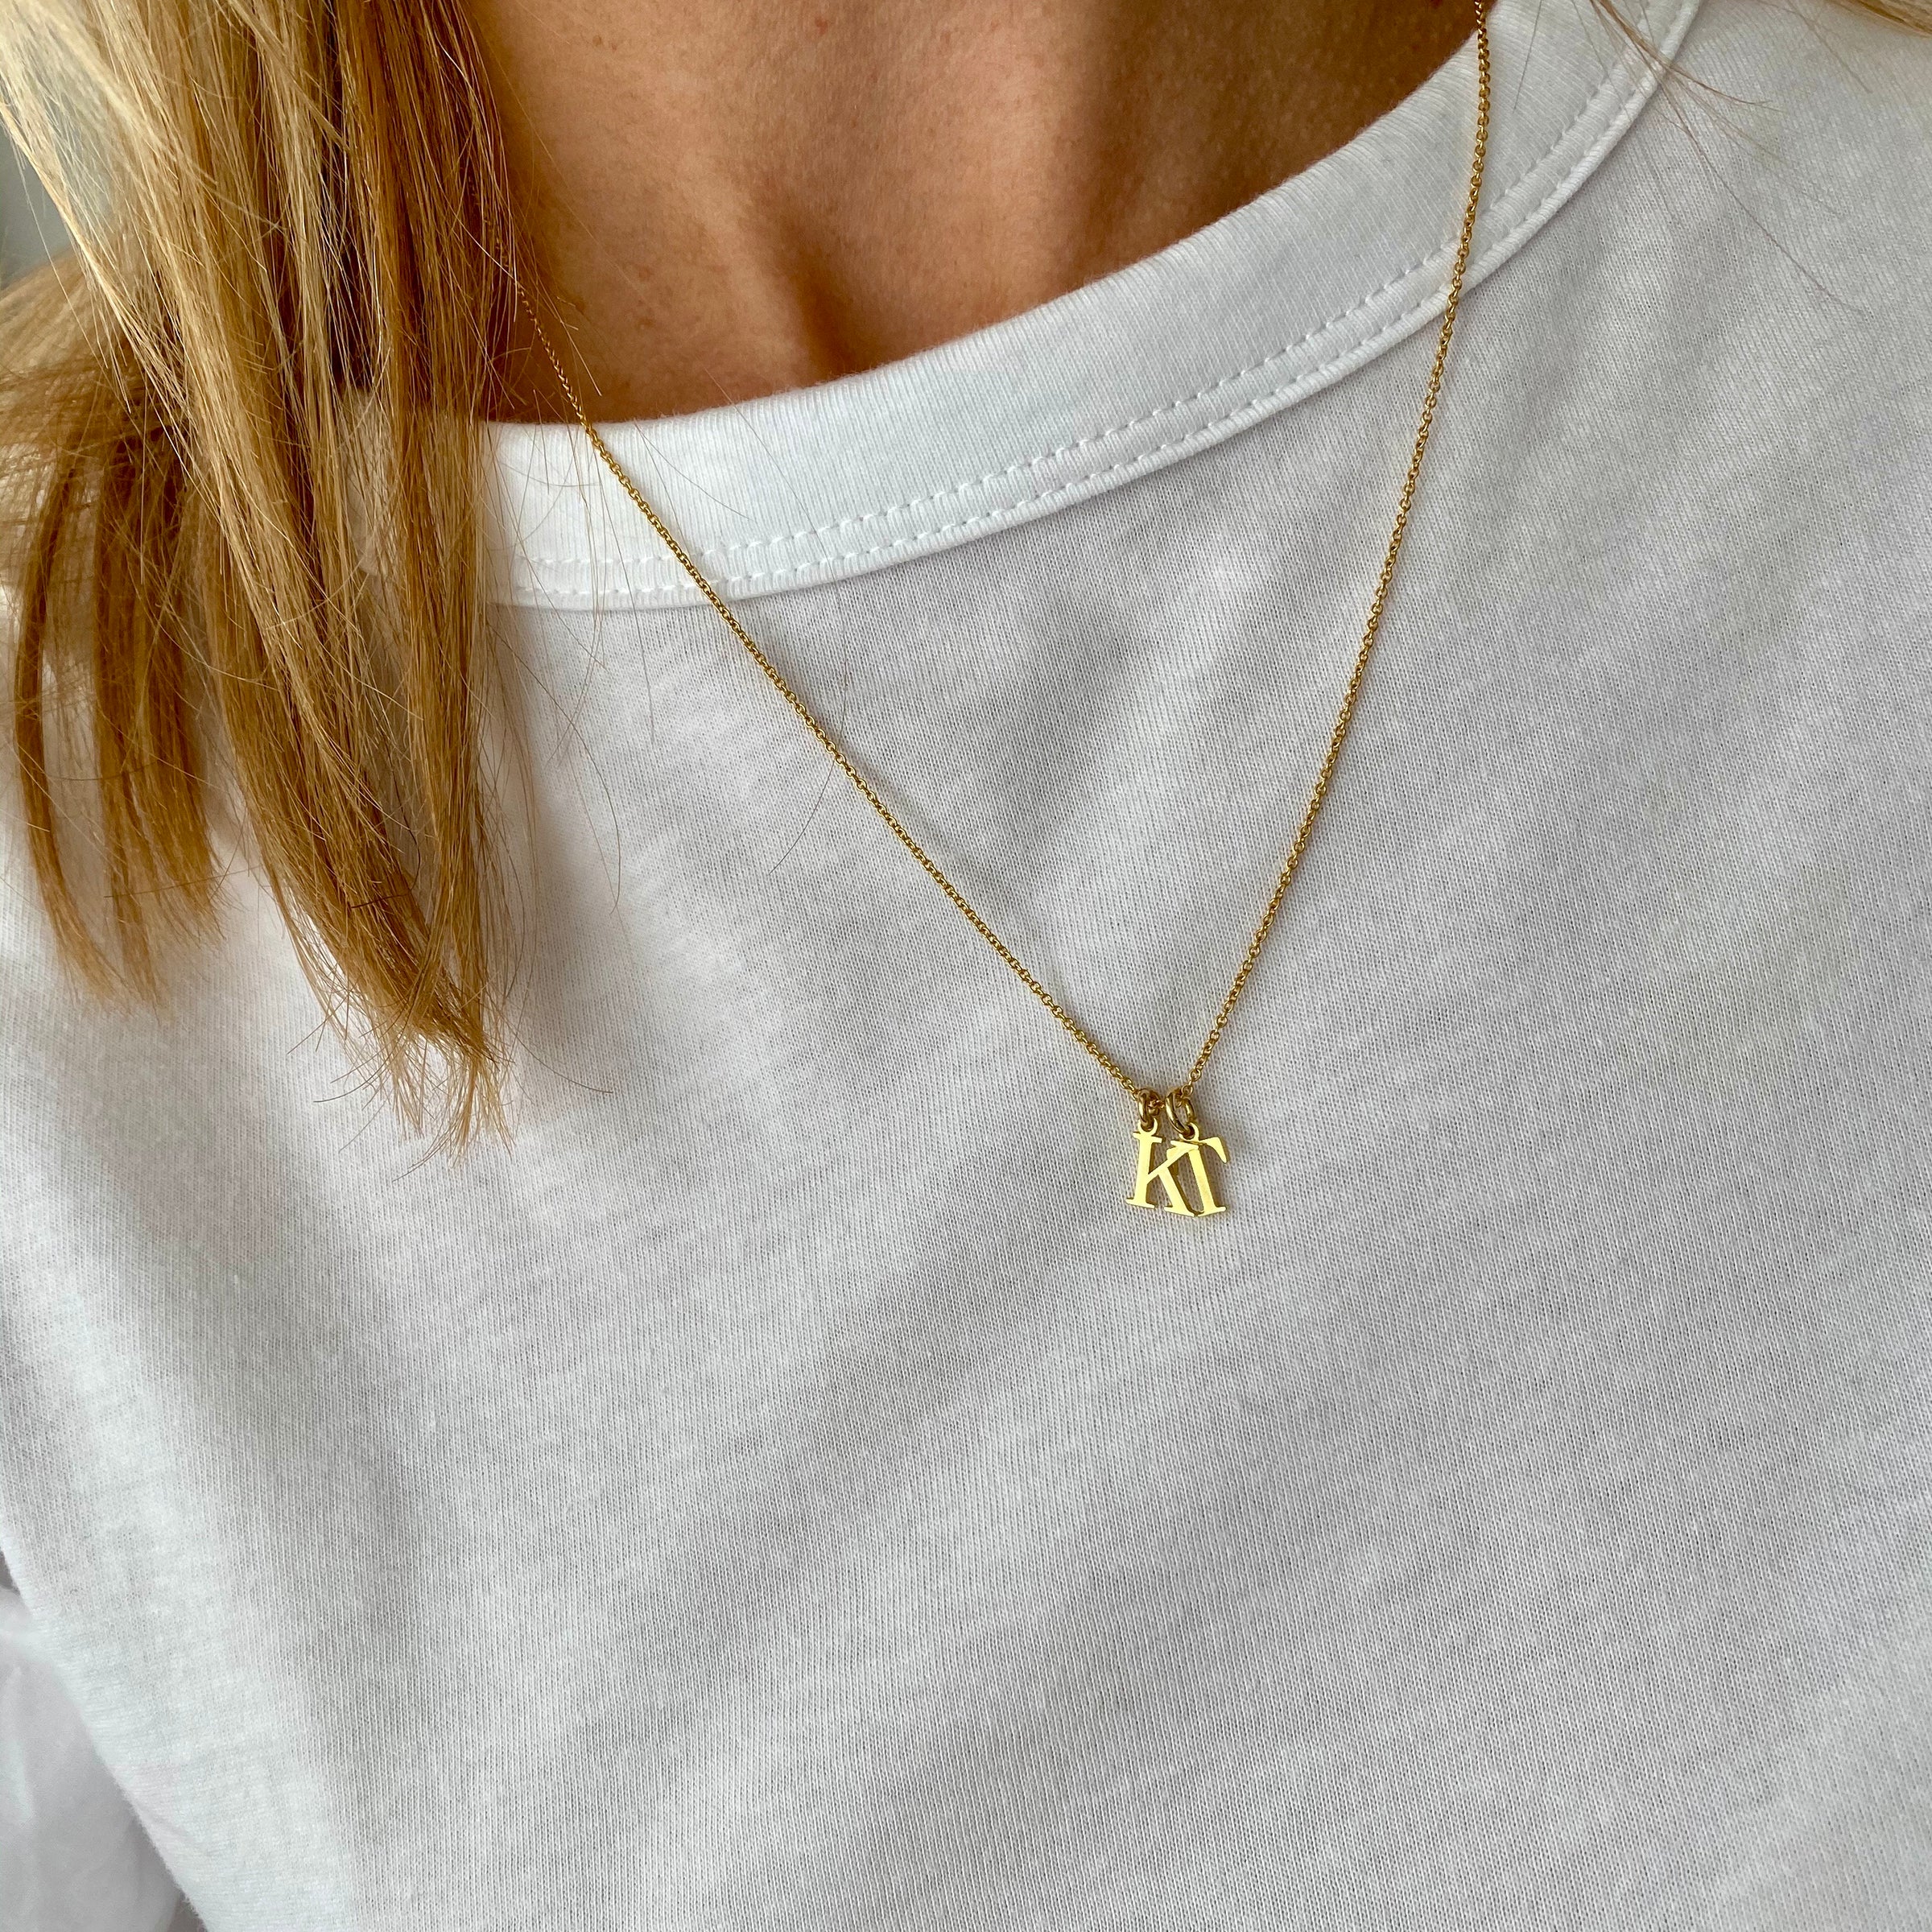 Dainty Initials Necklaces for Women Round Letter Shell Pendant Gold Plated  Stainless Steel Necklace Birthday Jewelry Gift - AliExpress